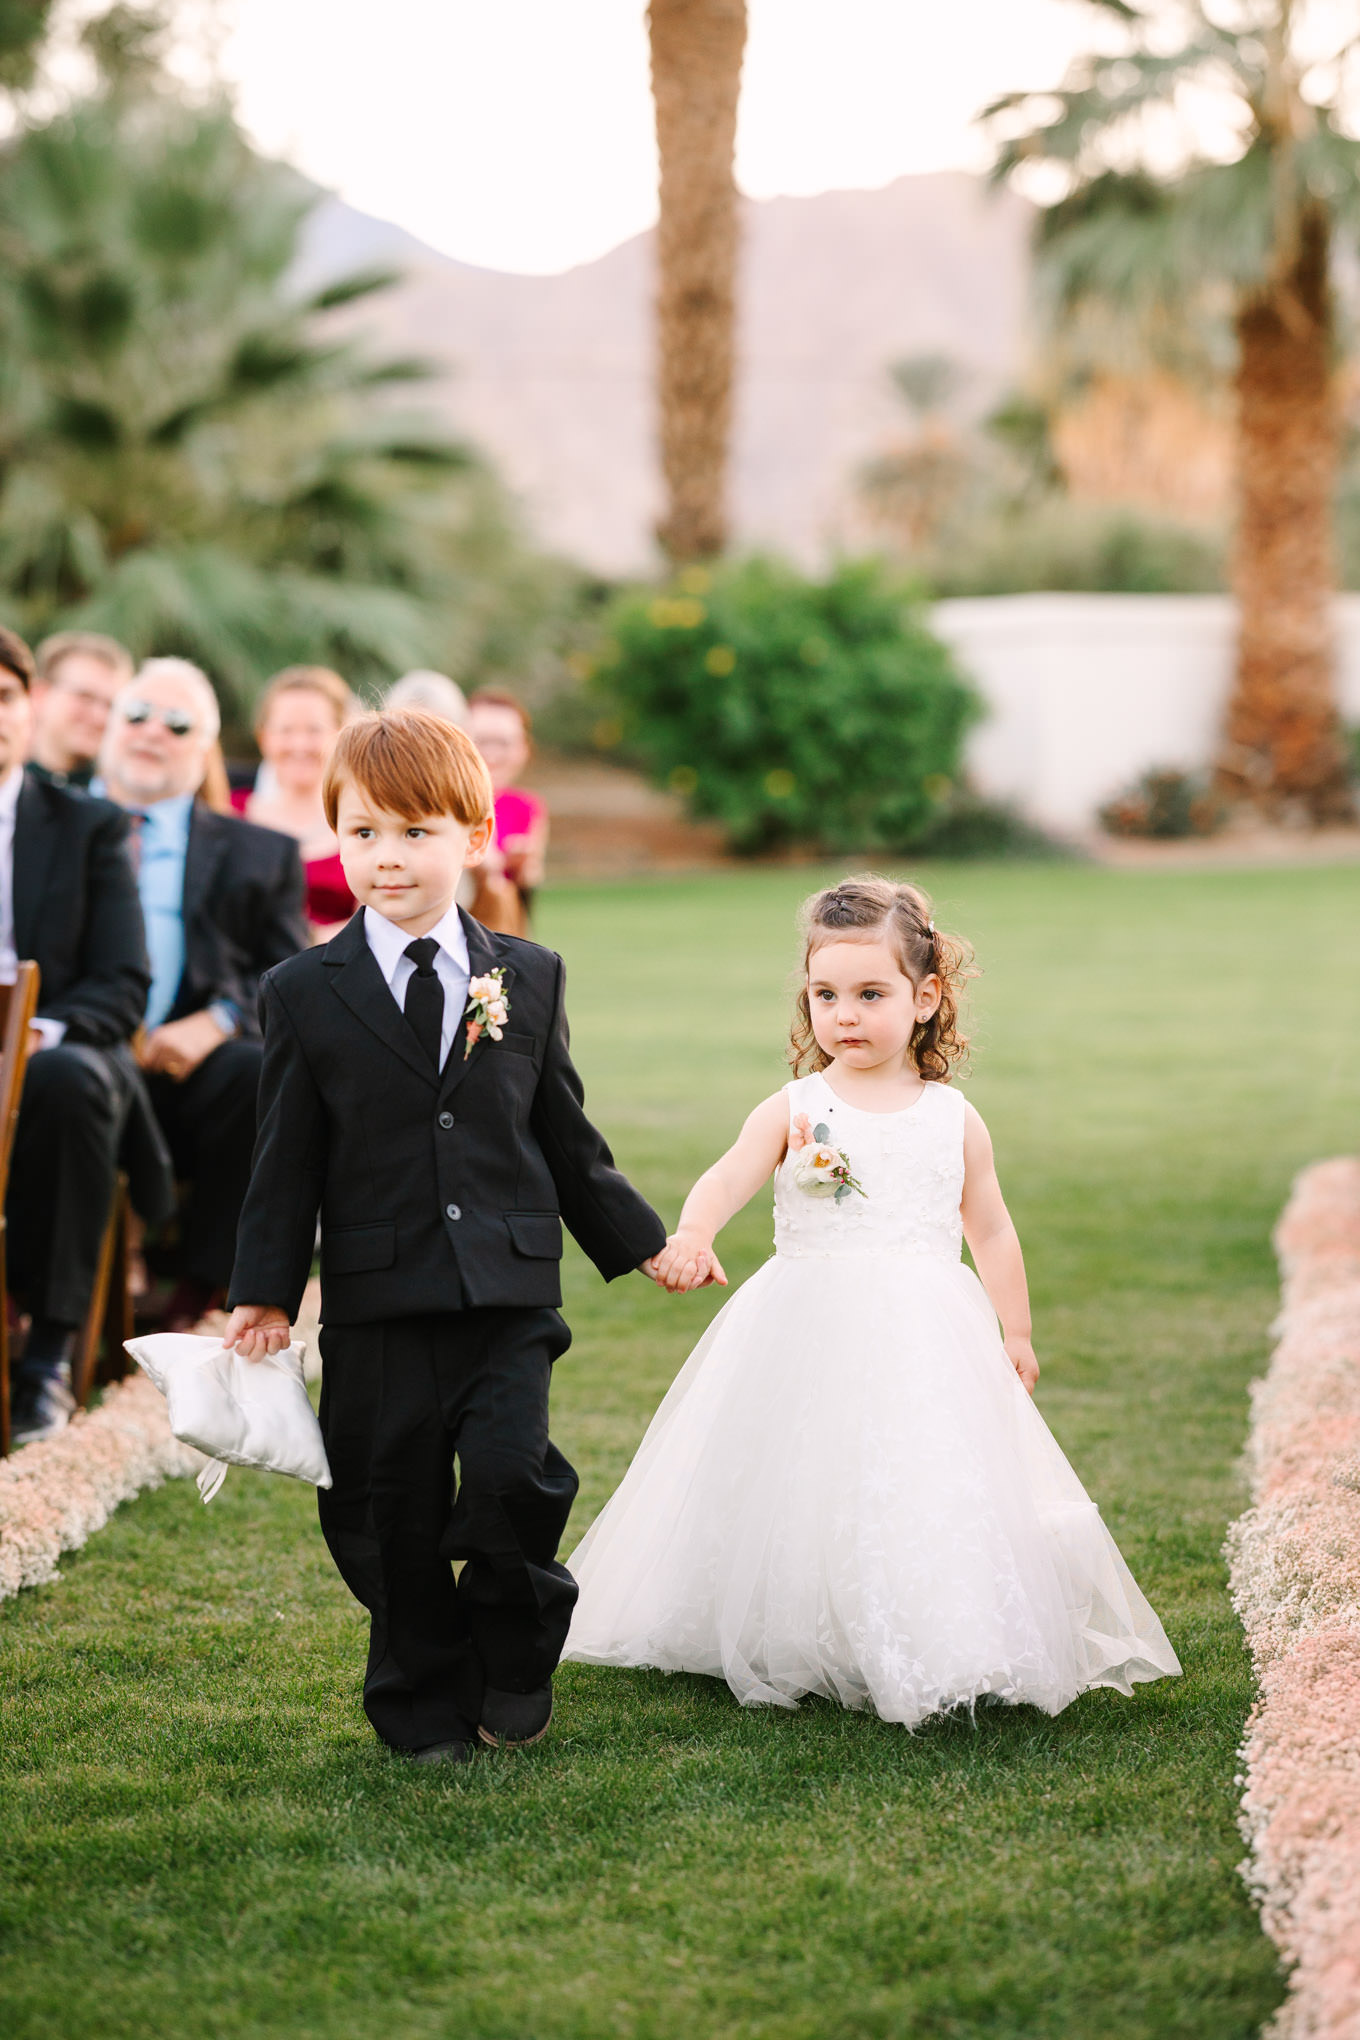 Flower girl and ring bearer | Pink Bougainvillea Estate wedding | Colorful LA wedding photography | #bougainvilleaestate #palmspringswedding #palmspringsweddingvenue #palmspringsphotographer Source: Mary Costa Photography | Los Angeles